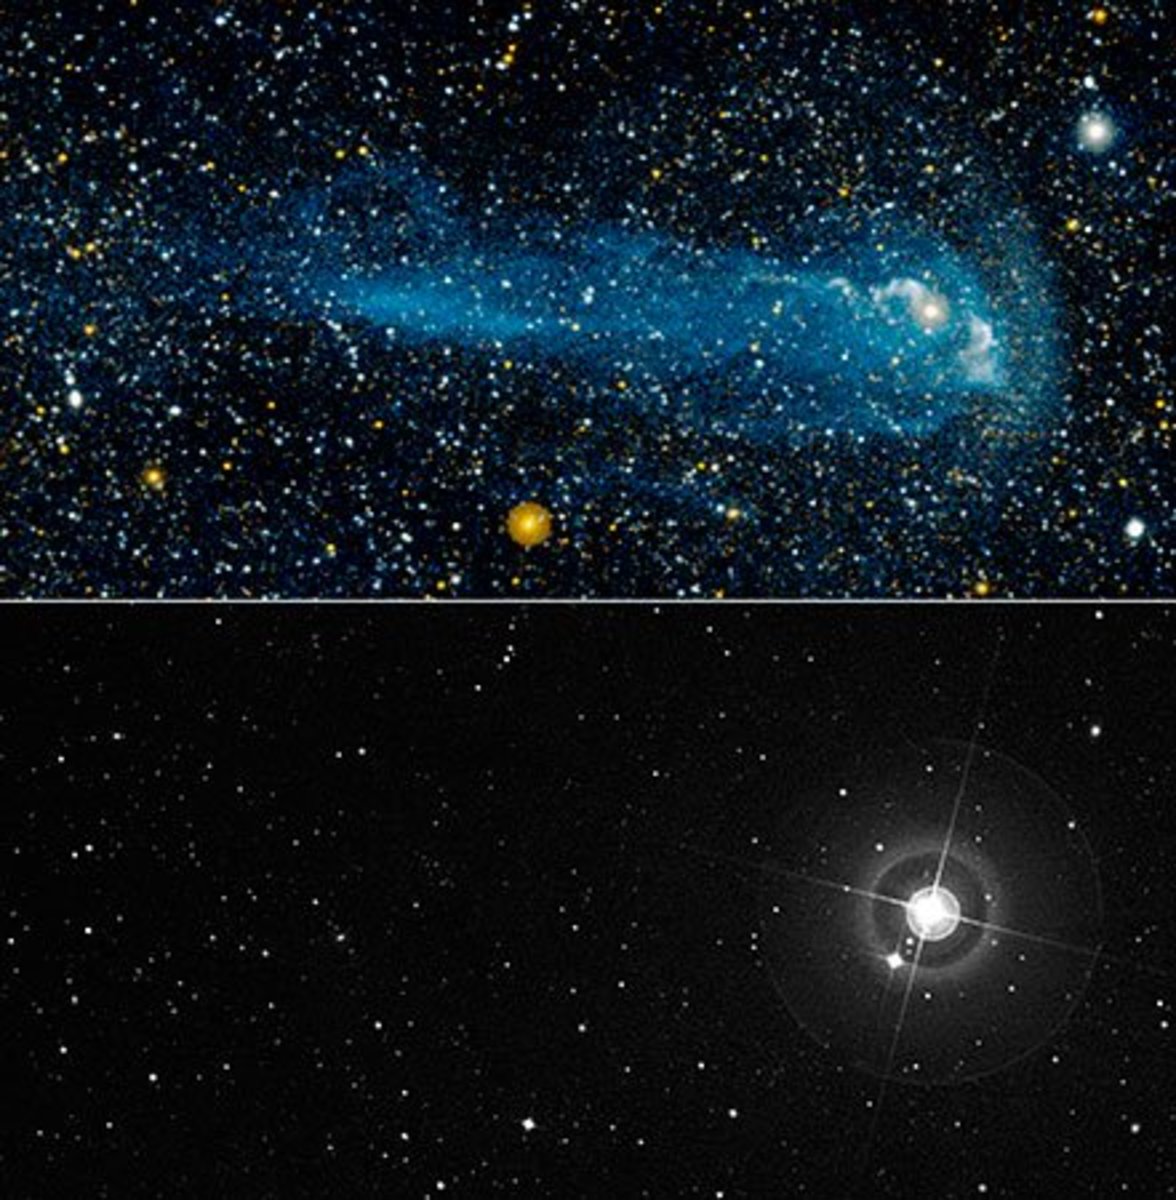 The Long Tail Of Mira Can Only Be Seen Under UV Light. Image Above: UV Light; Image Below: Visible Light.